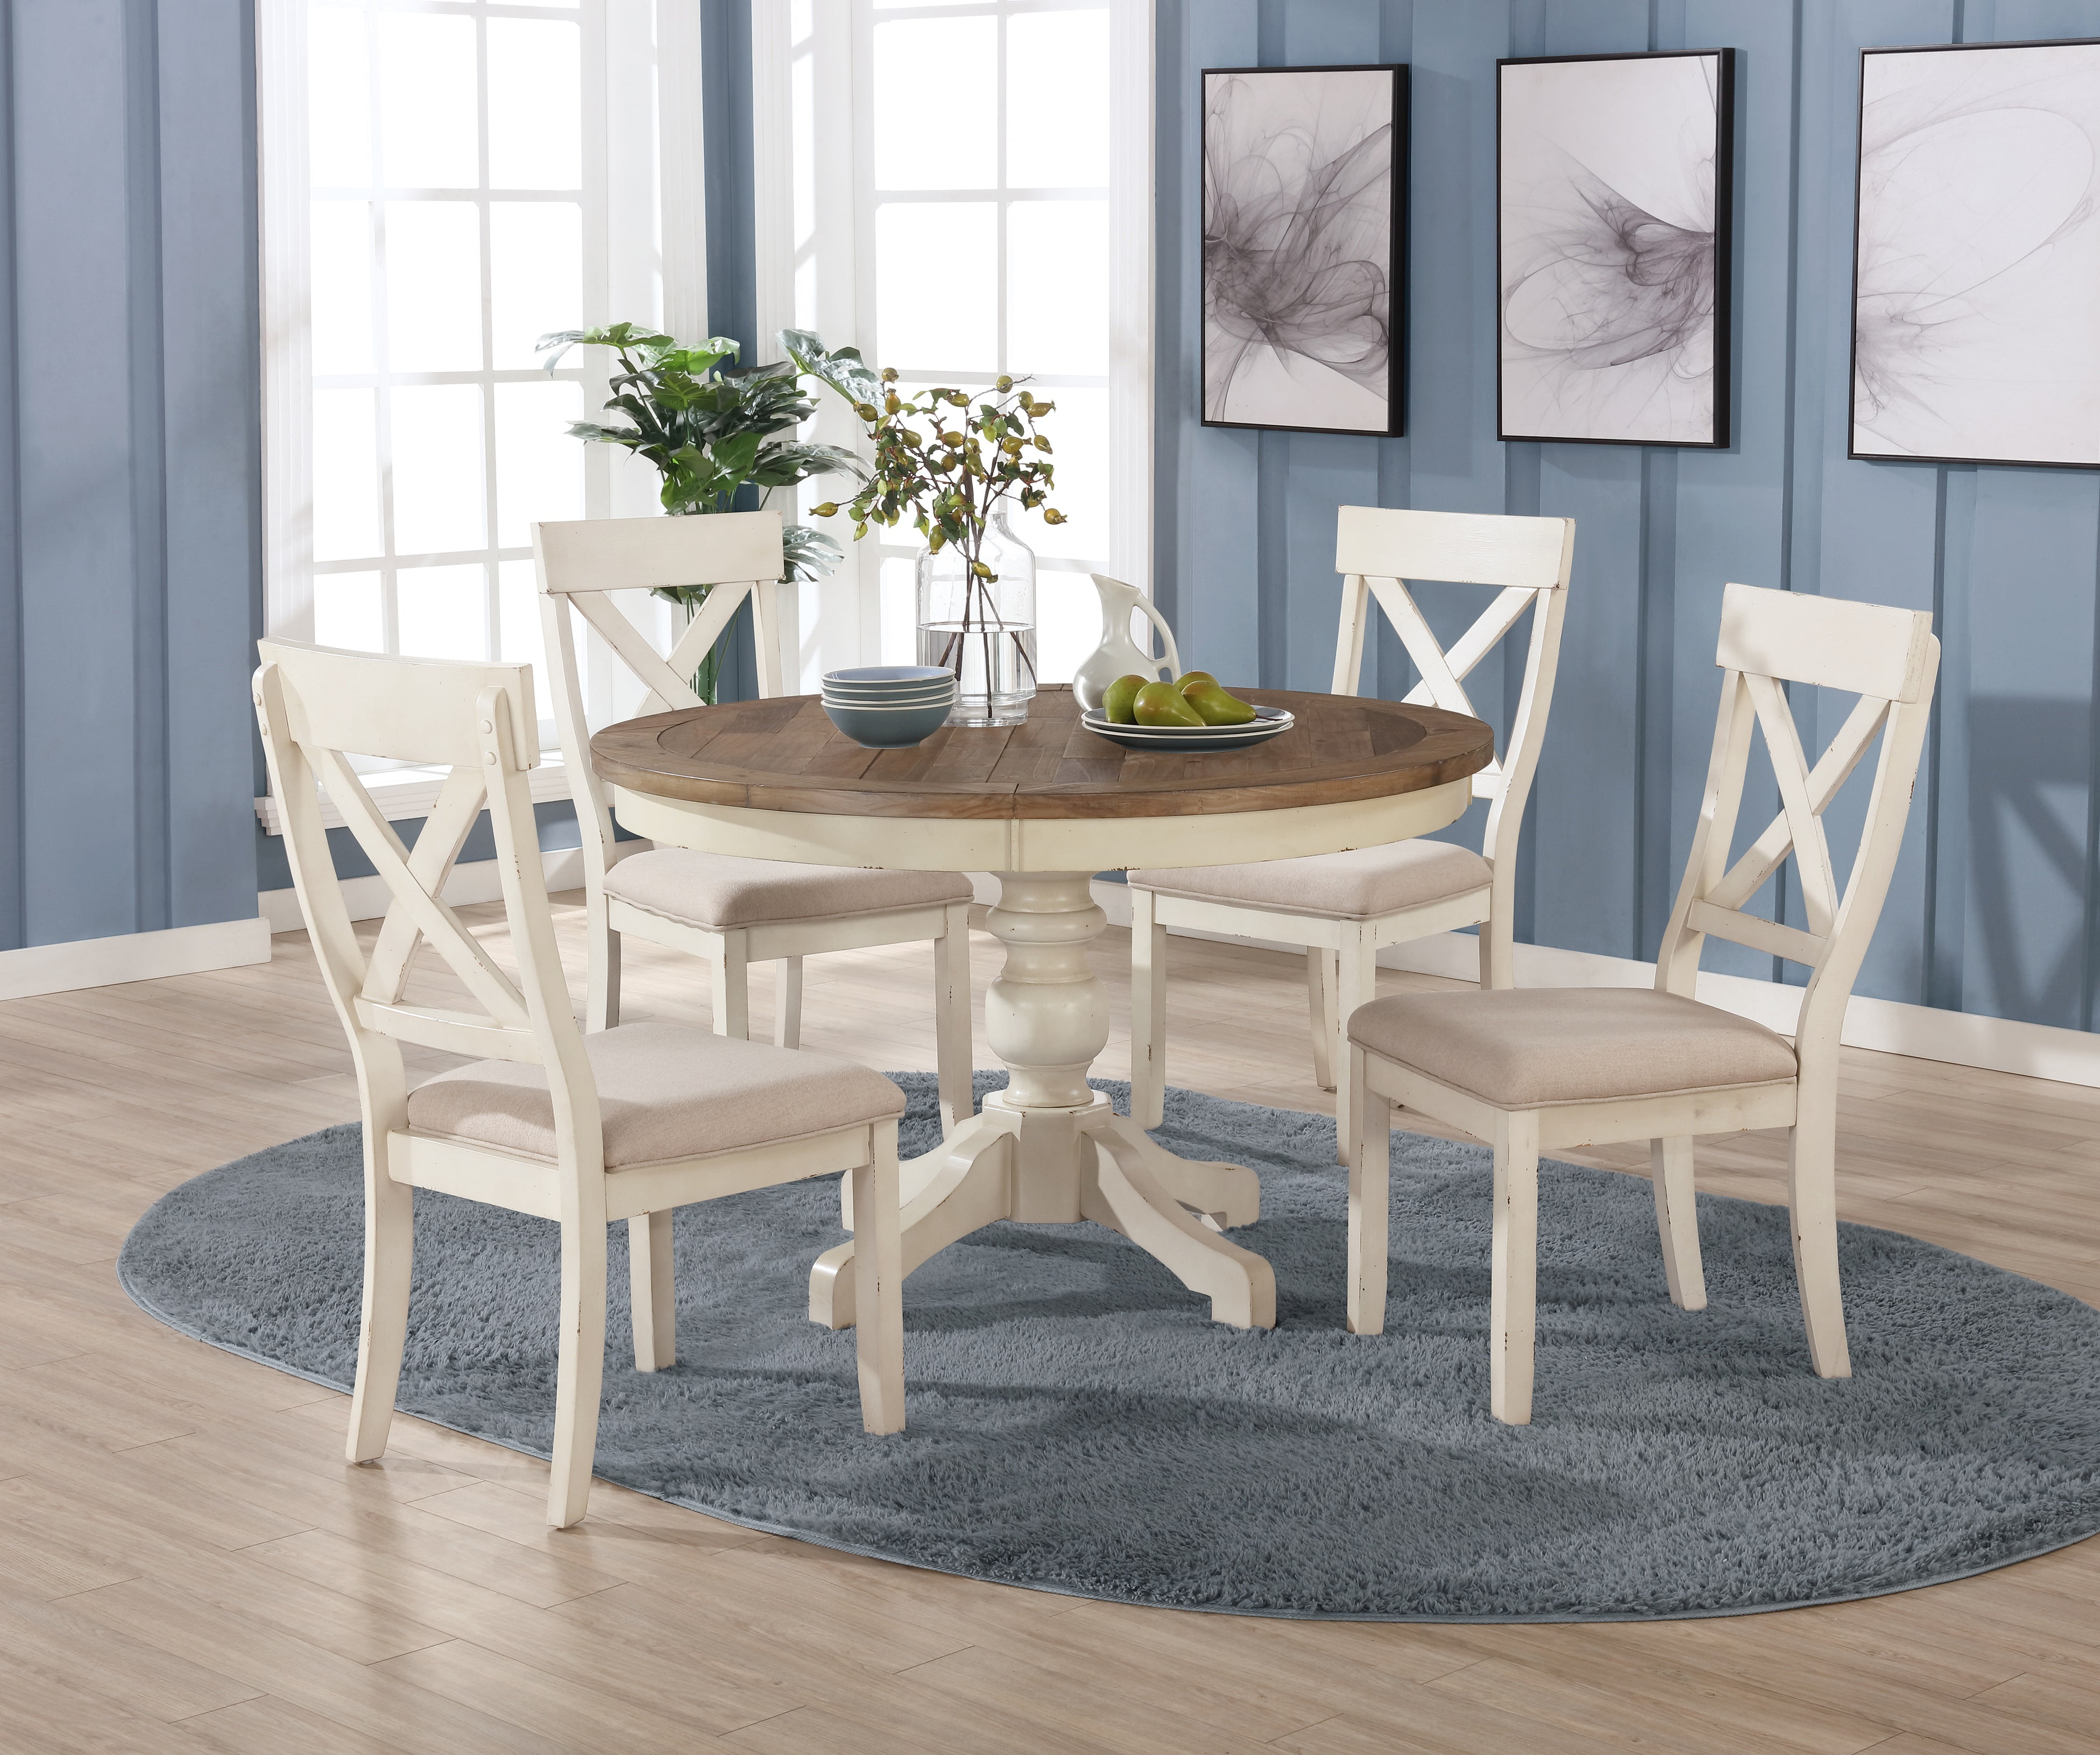 Roundhill Furniture Prato 5-Piece Round Dining Table Set with Cross ...